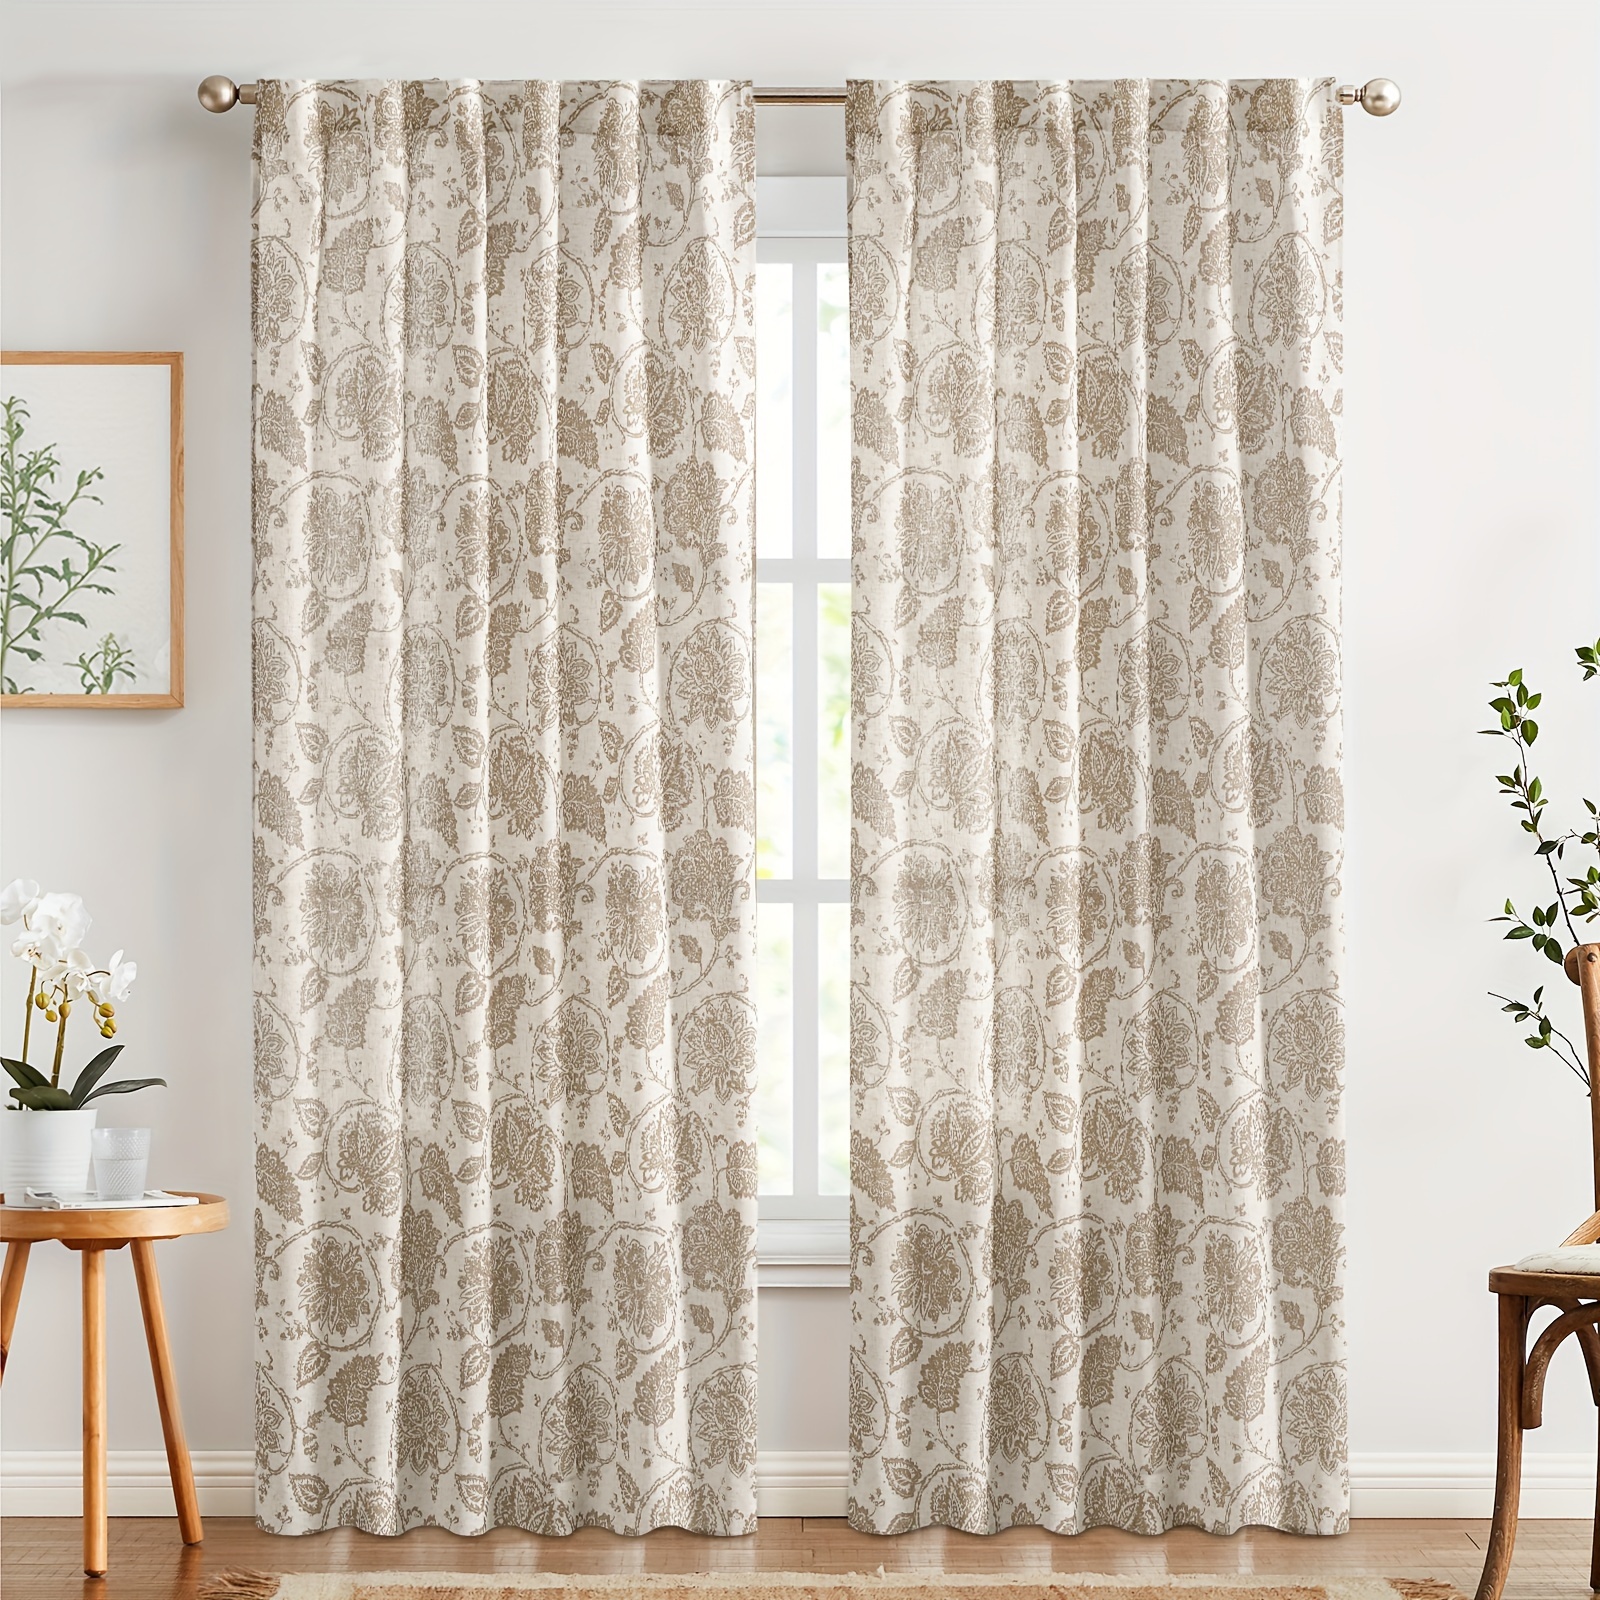 

Collact Linen Curtains For Living Room, Taupe Floral Paisley Patterned Curtains 63 Inch Length, Light Filtering Ikat Drapes For Bedroom, Vintage Farmhouse Window Treatments, Back Tab 2 Panels, Taupe